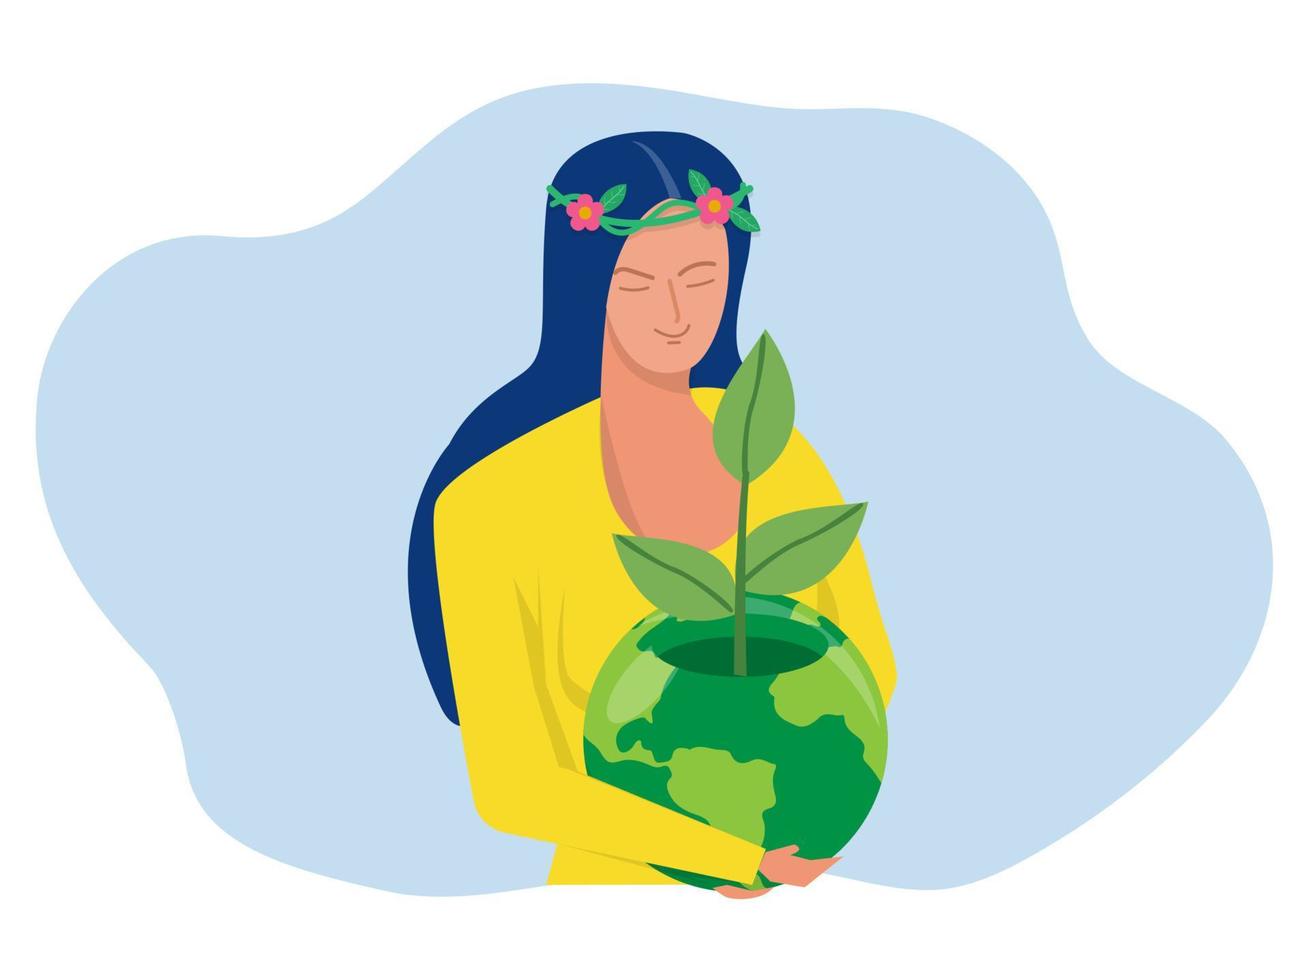 World Earth Day green eco energy , Young woman embracing the planet Earth with World Earth Day and Save the Planet concept of conservation, protection and reasonable consumption of natural resources. vector